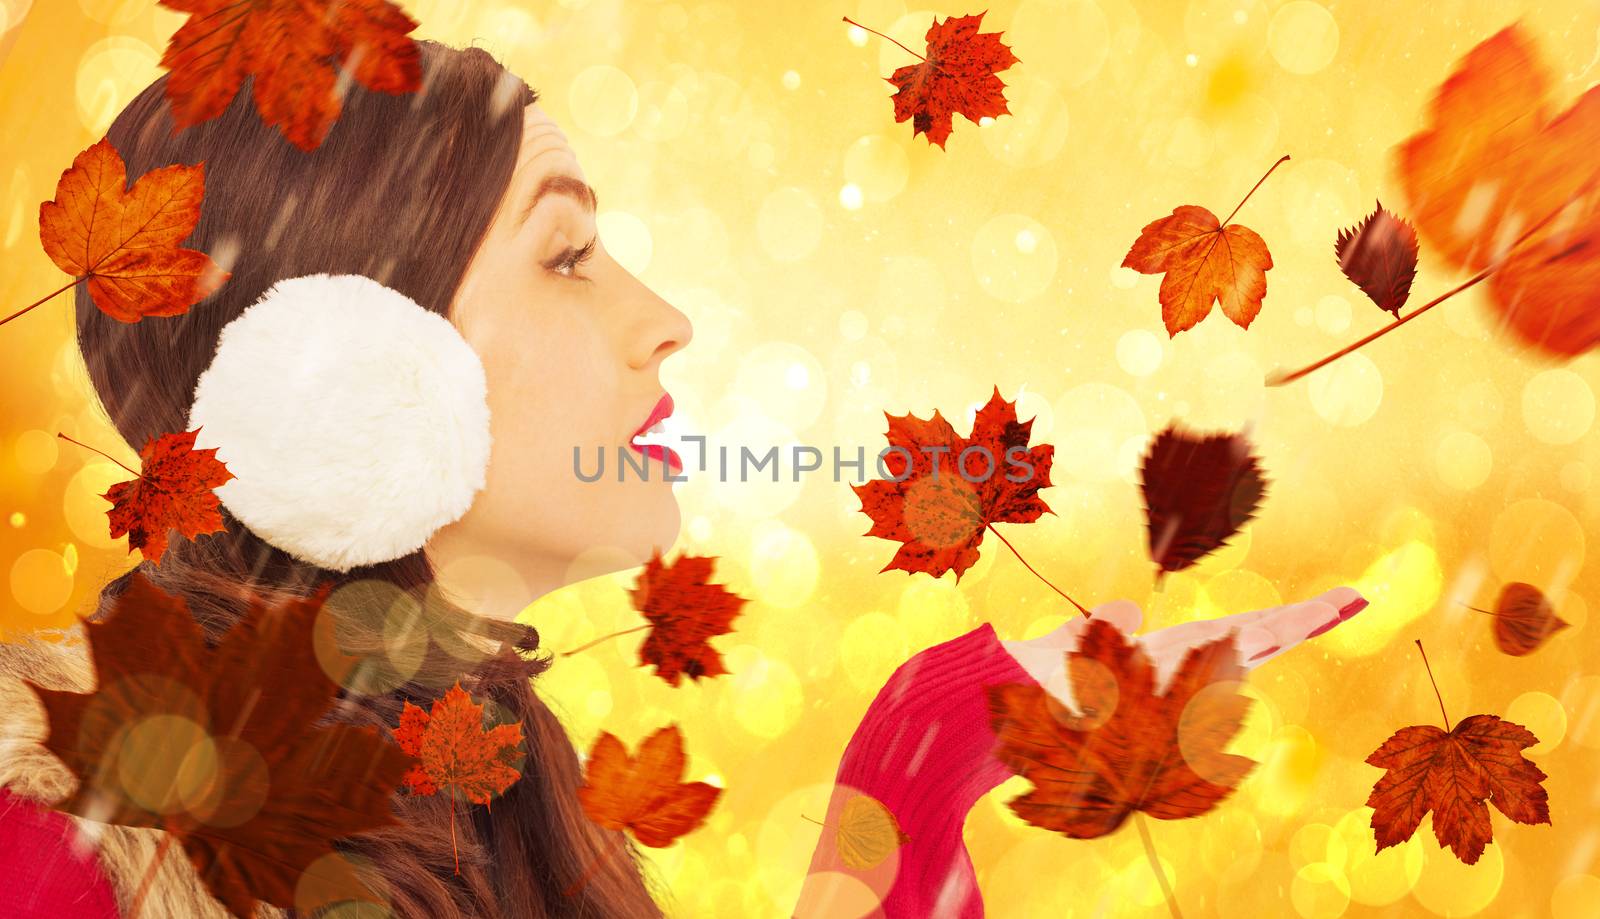 Brunette in winter clothes with hand out against yellow abstract light spot design